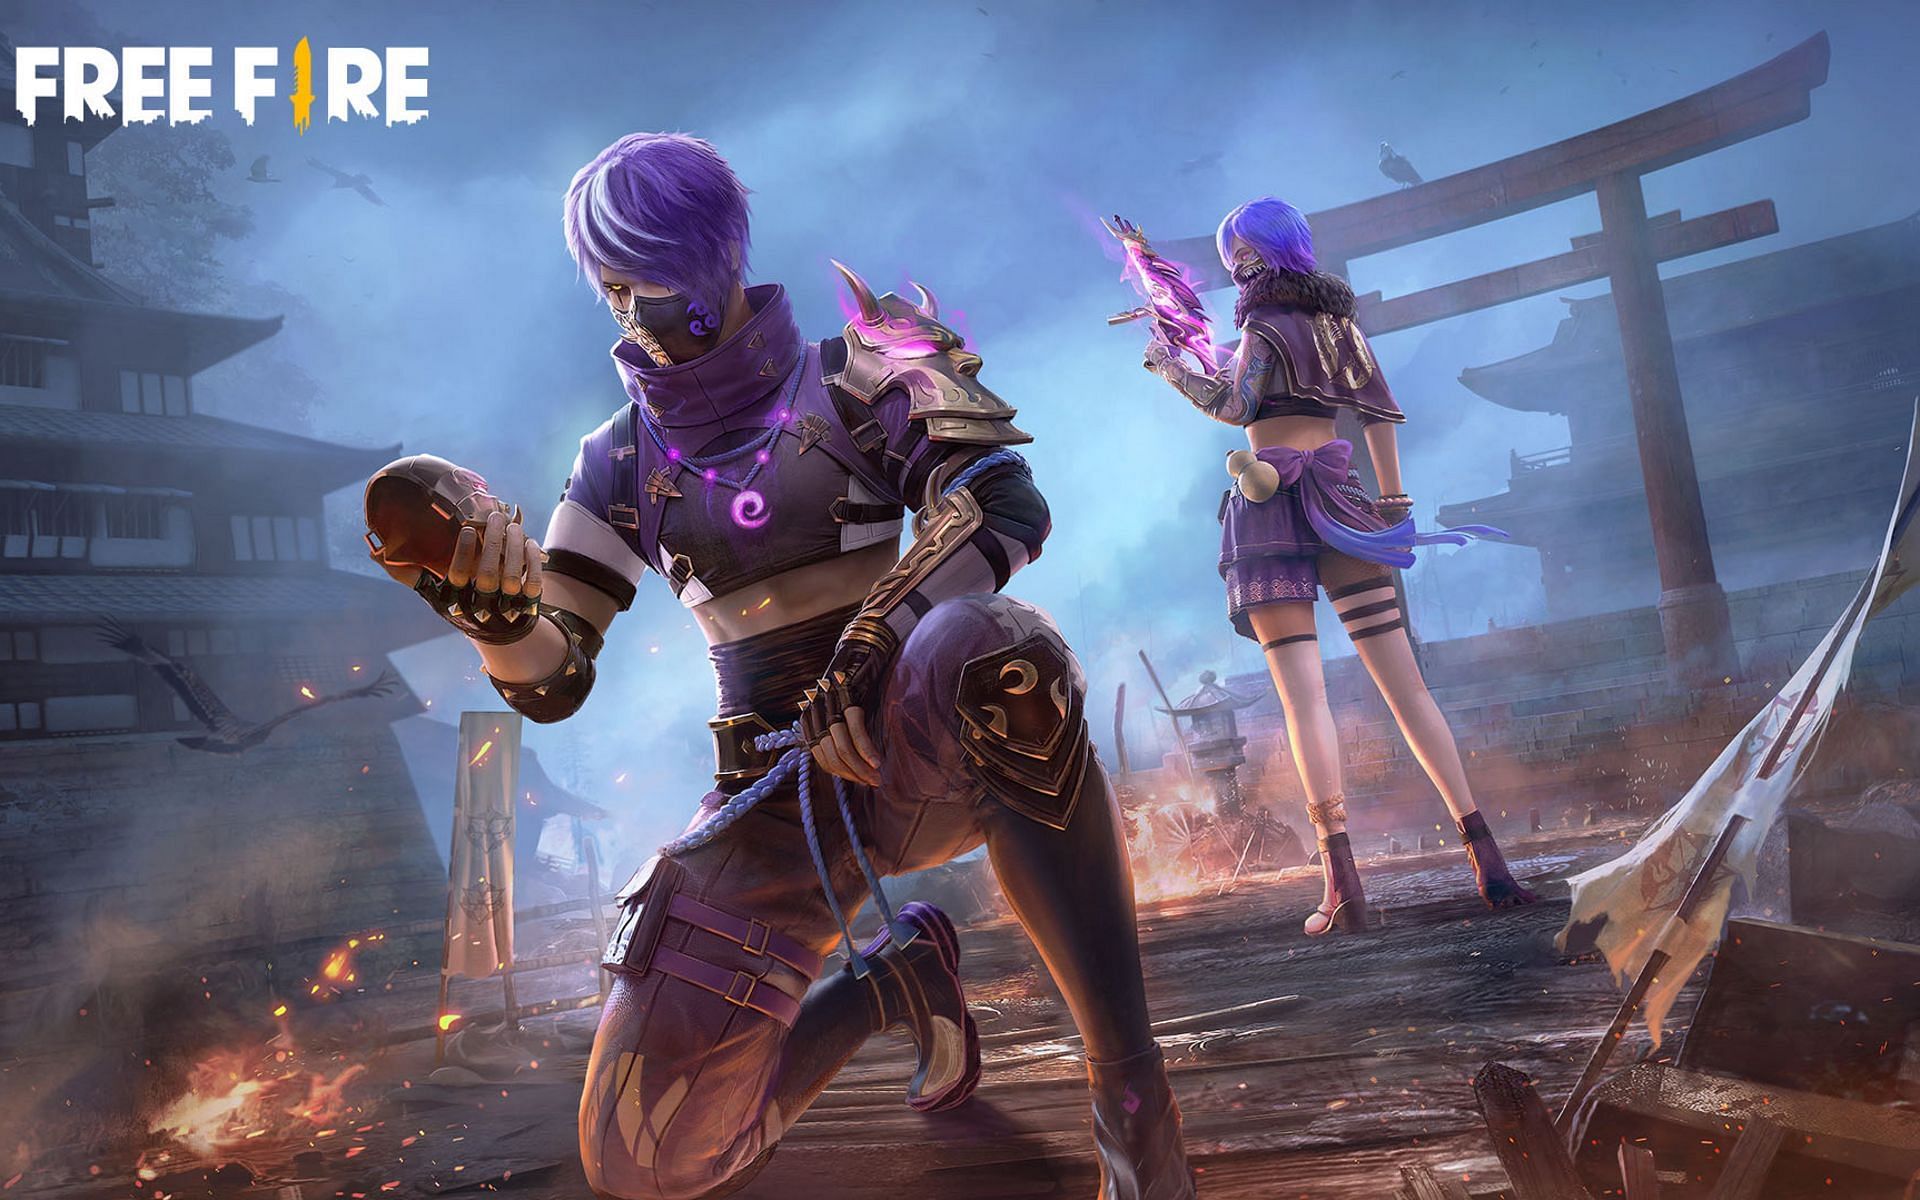 Top 5 free games like Garena Free Fire under 400 MB in 2022